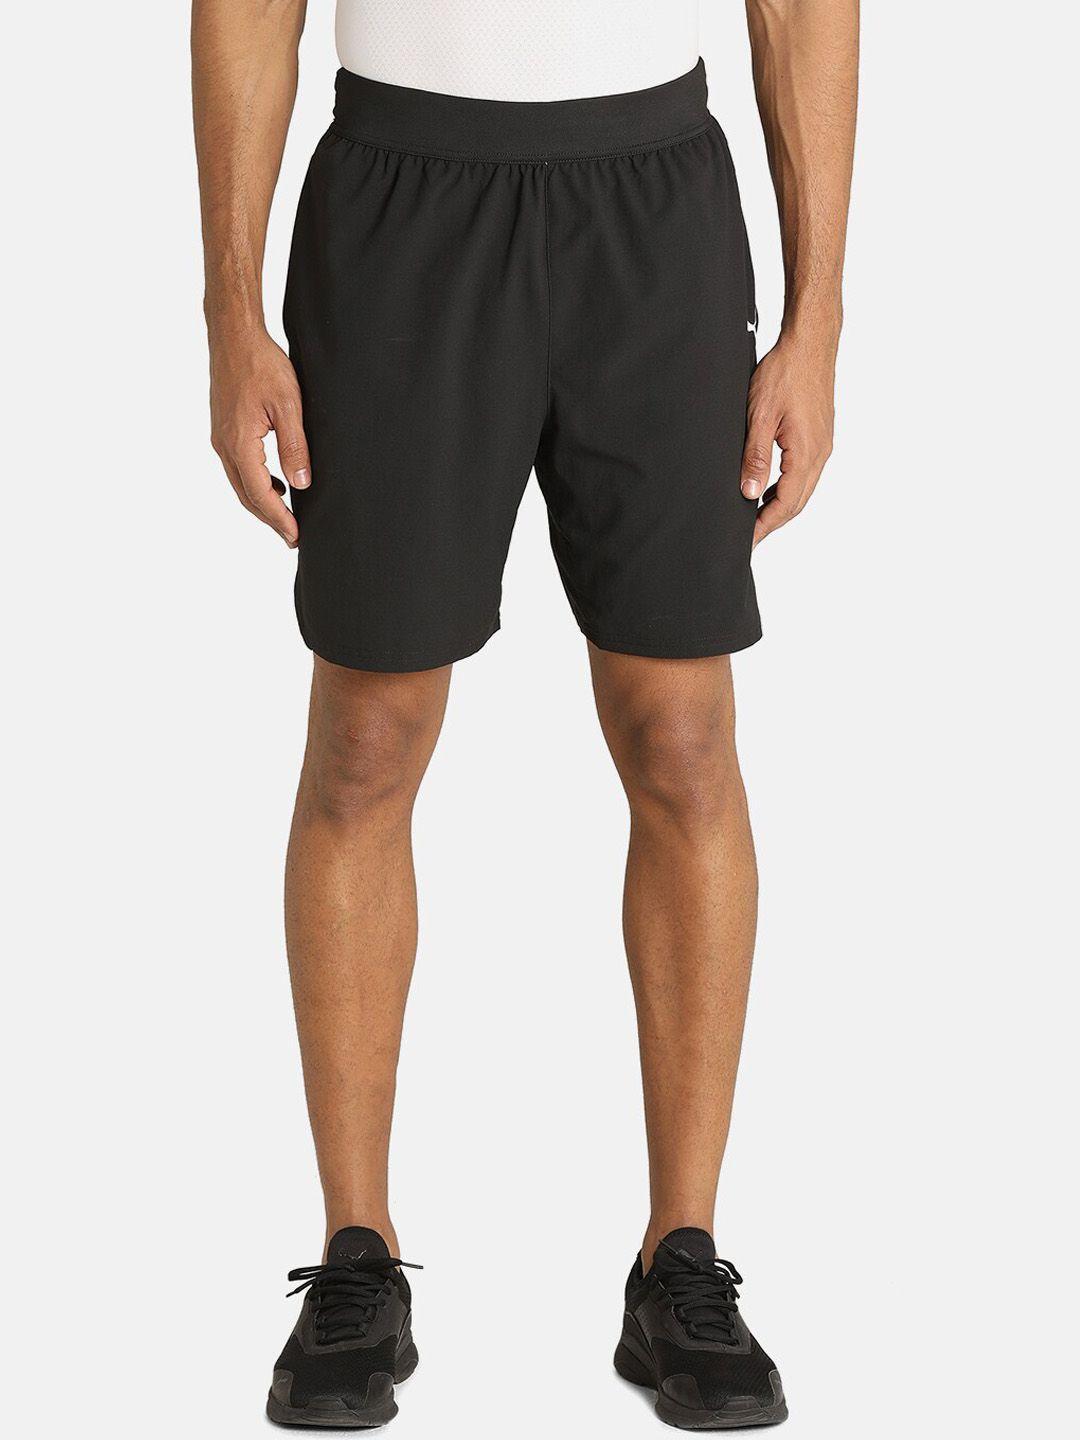 puma-men-black-drycell-training-or-gym-sports-sustainable-shorts